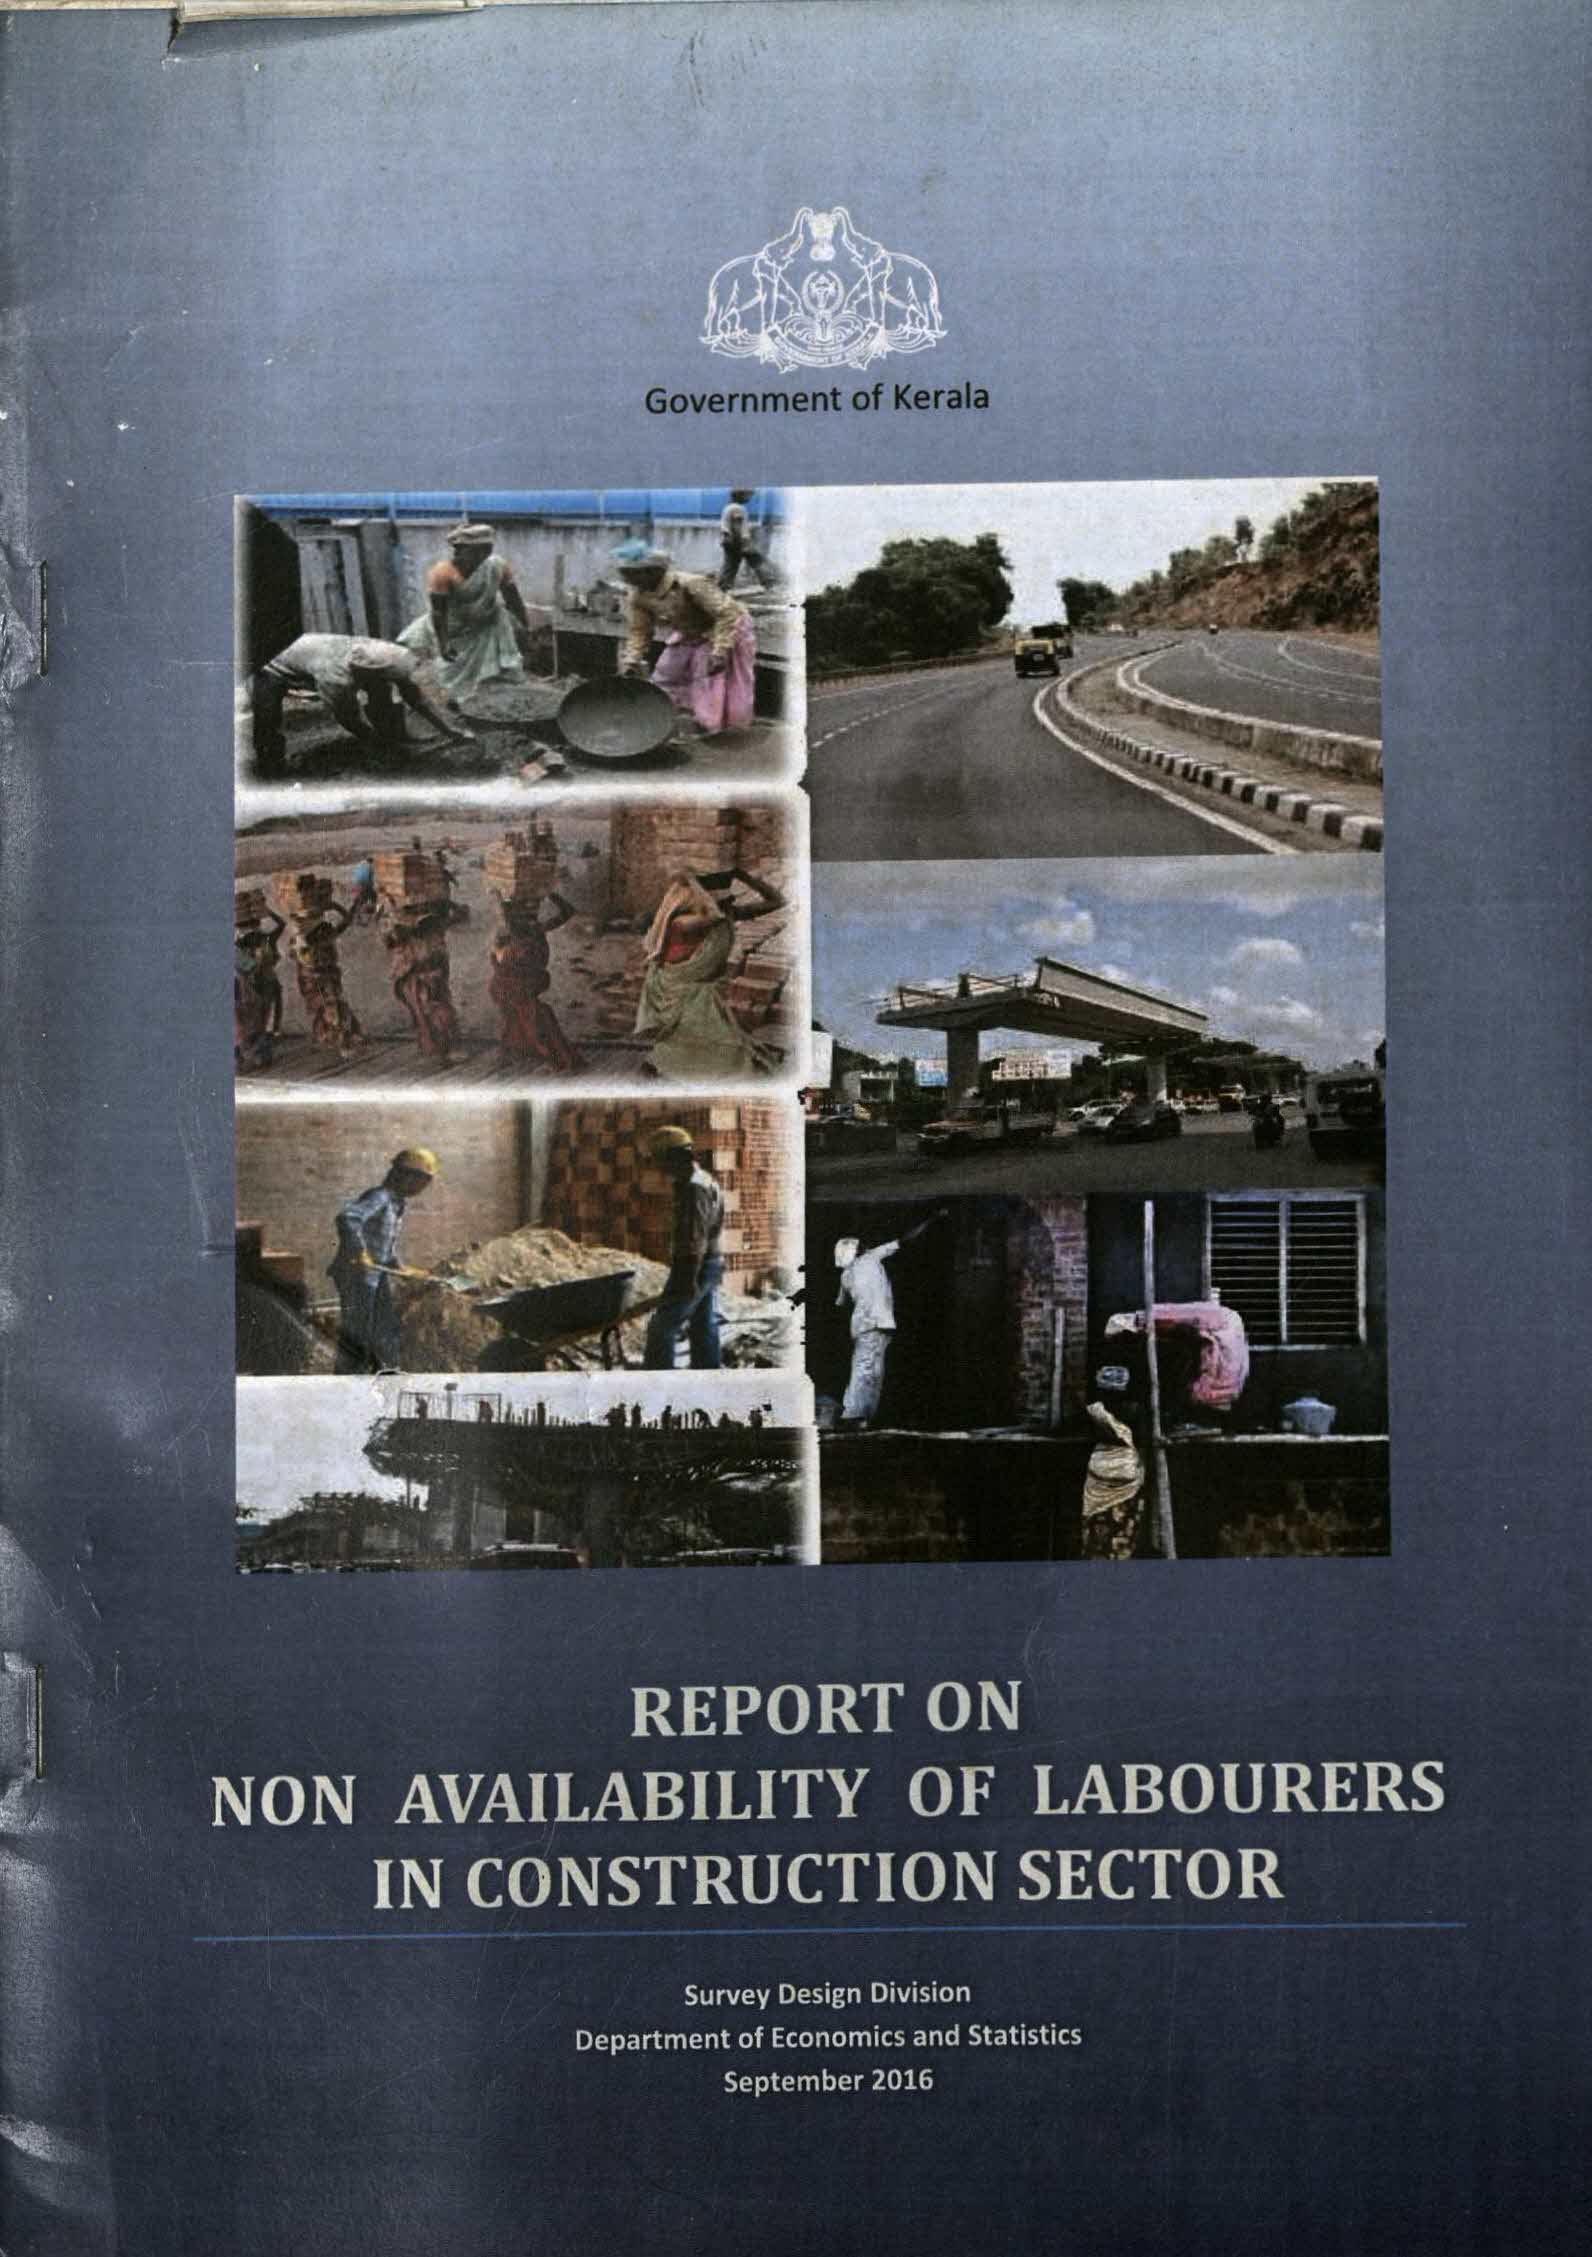 REPORT ON NON AVAILABILITY OF LABOURERS IN CONSTRUCTION SECTOR_1